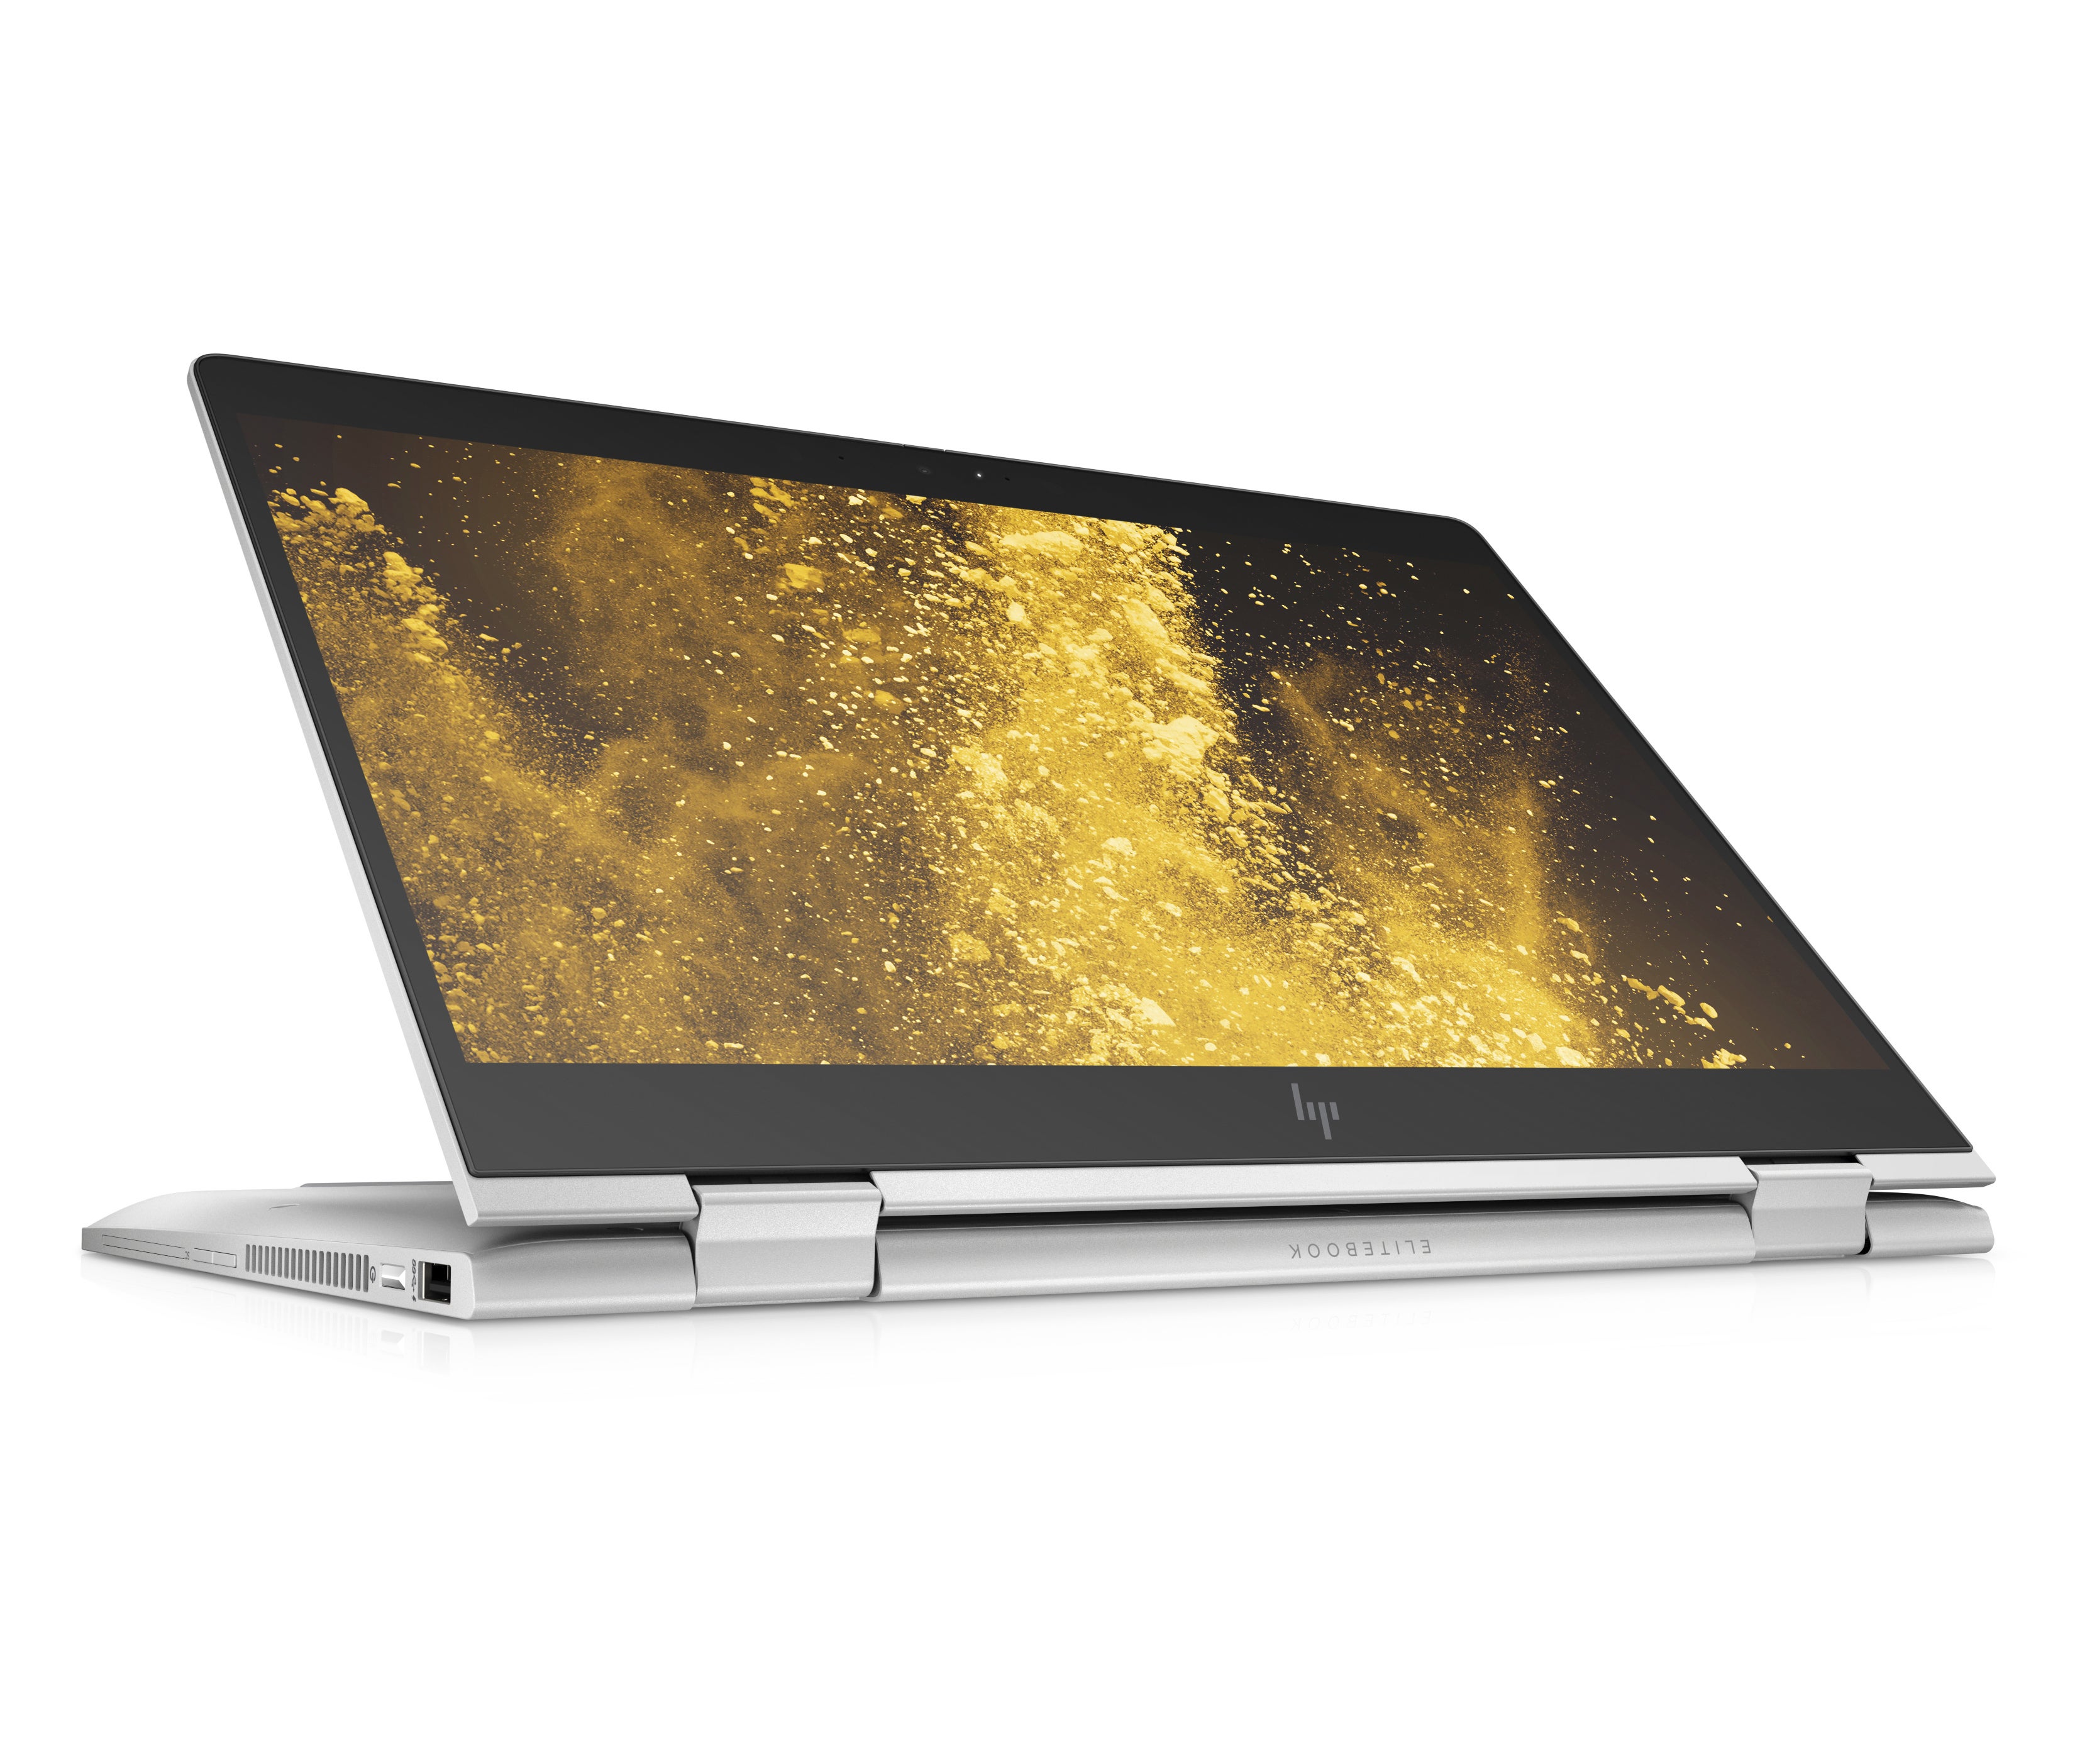 Hps Elitebook 800 G6 Notebook Series Adds Convenience Privacy Features Pcworld 5639